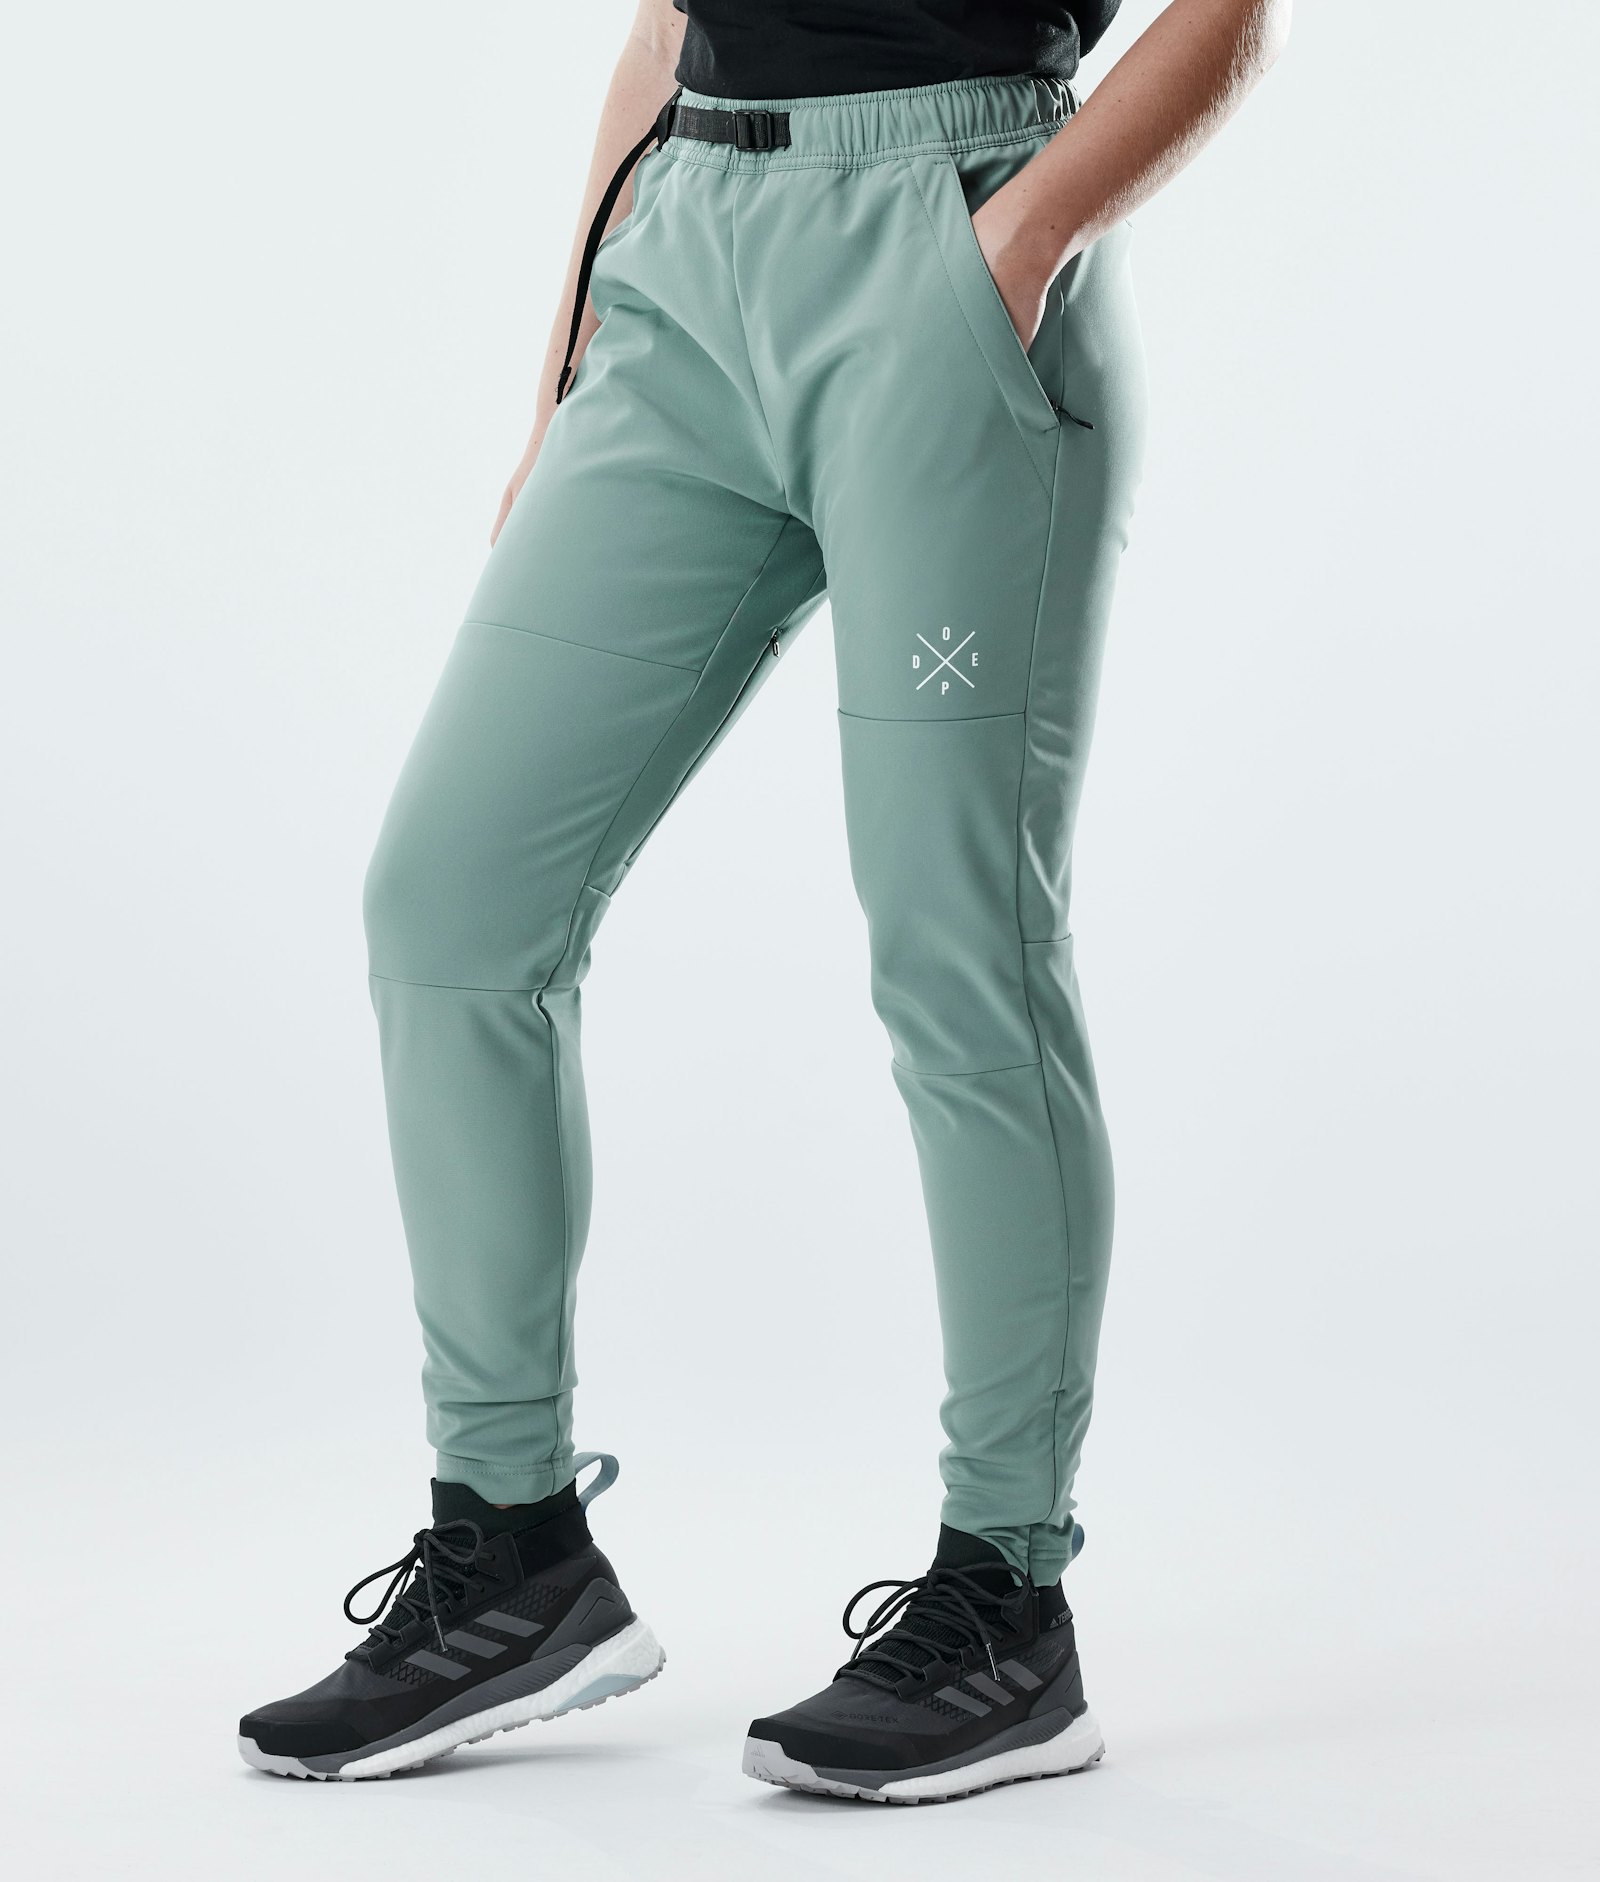 Dope Nomad W 2021 Outdoor Pants Women Faded Green, Image 1 of 10